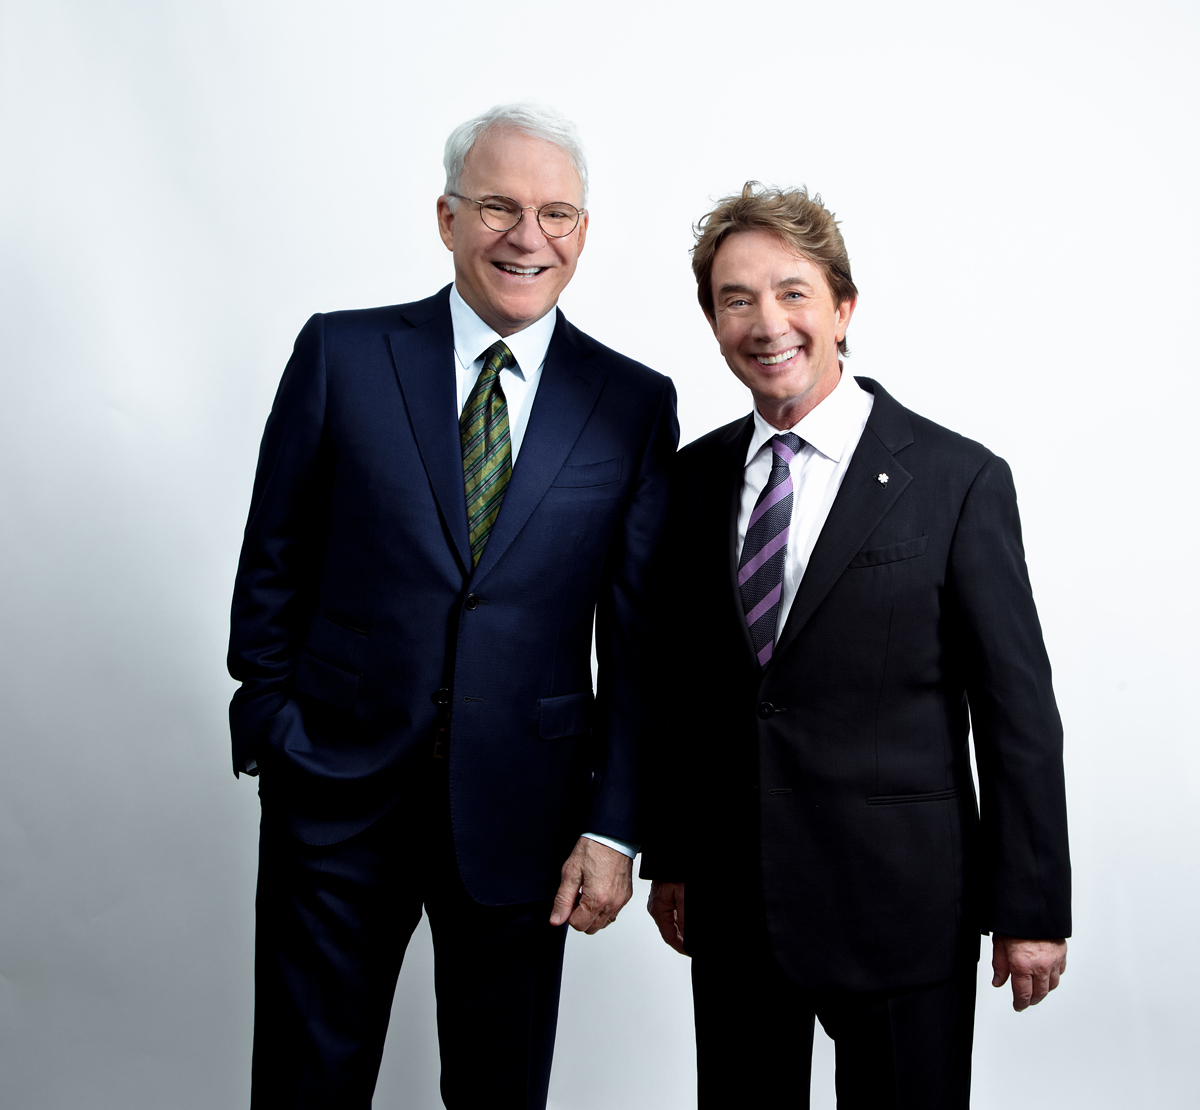 Steve Martin & Martin Short – “An Evening You Will Forget  for the Rest of Your Life”